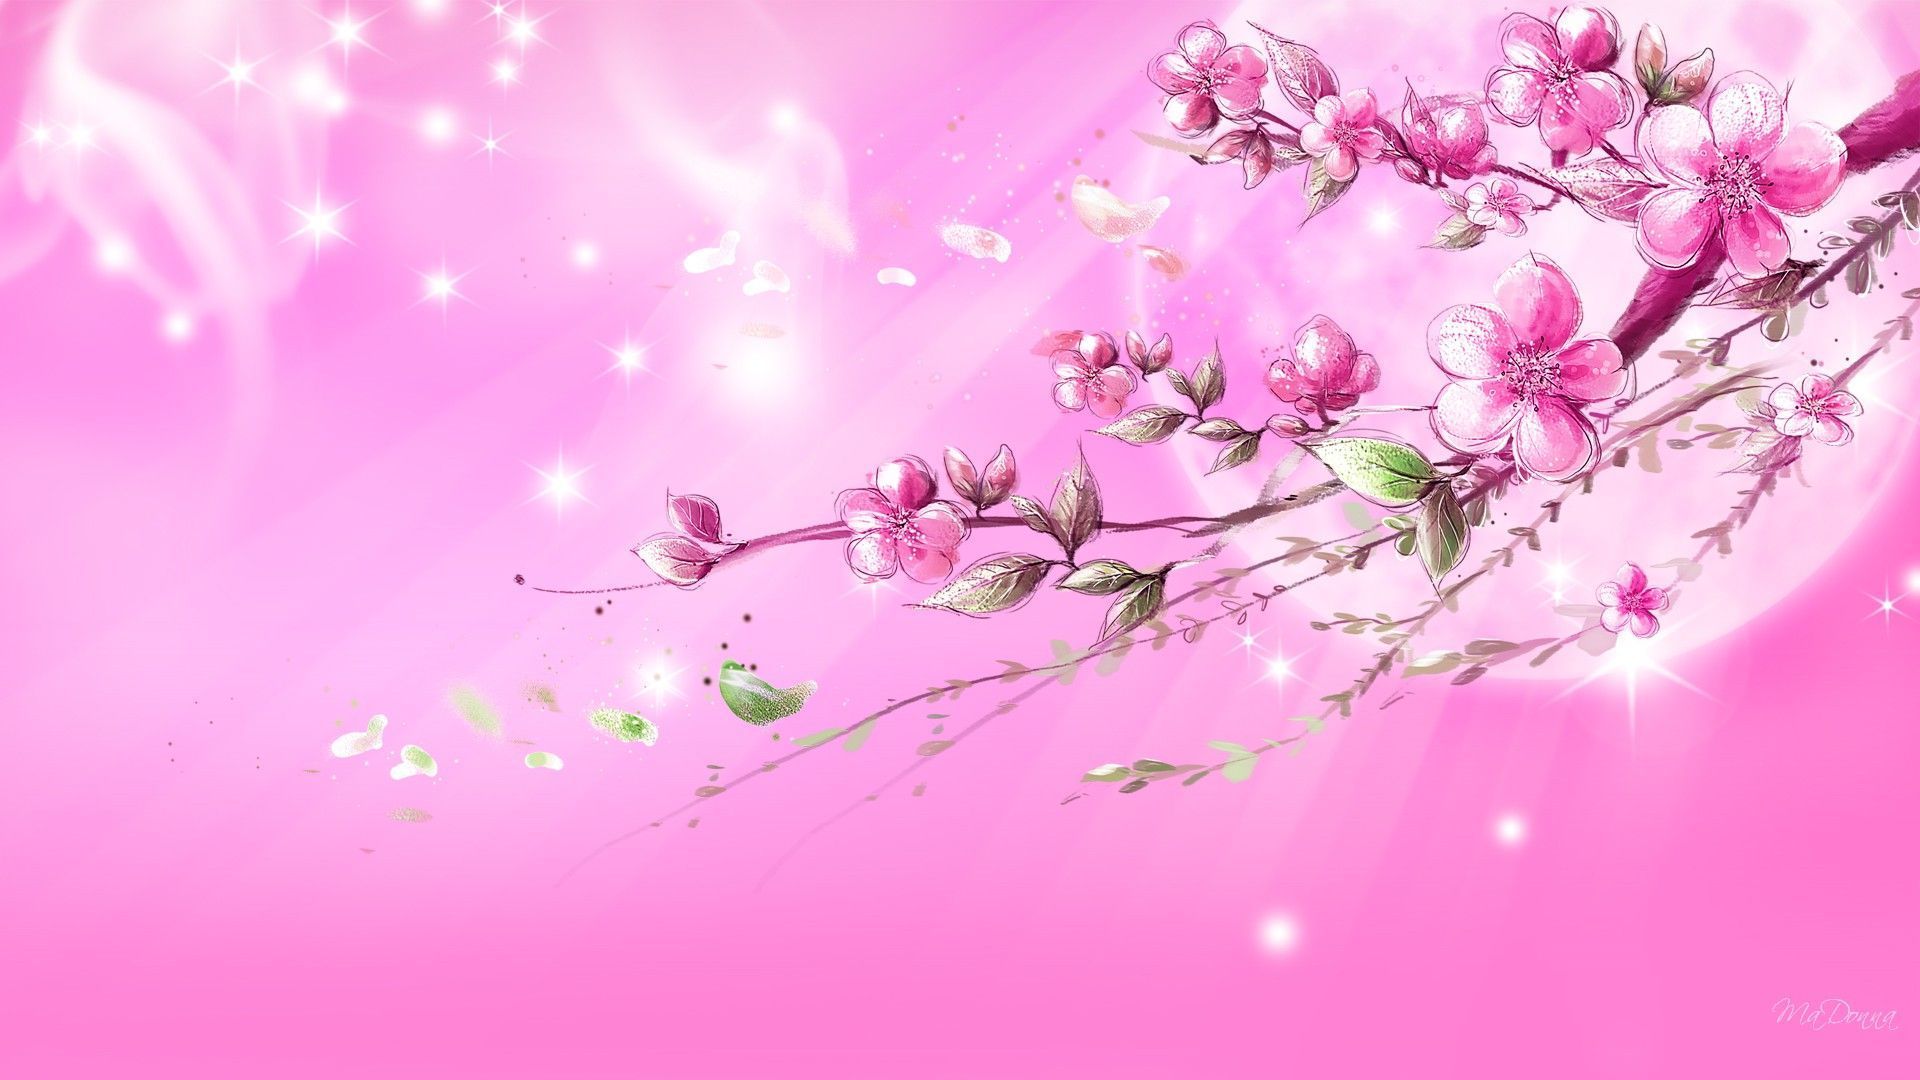 35 High Definition Pink Wallpapers/Backgrounds For Free Download